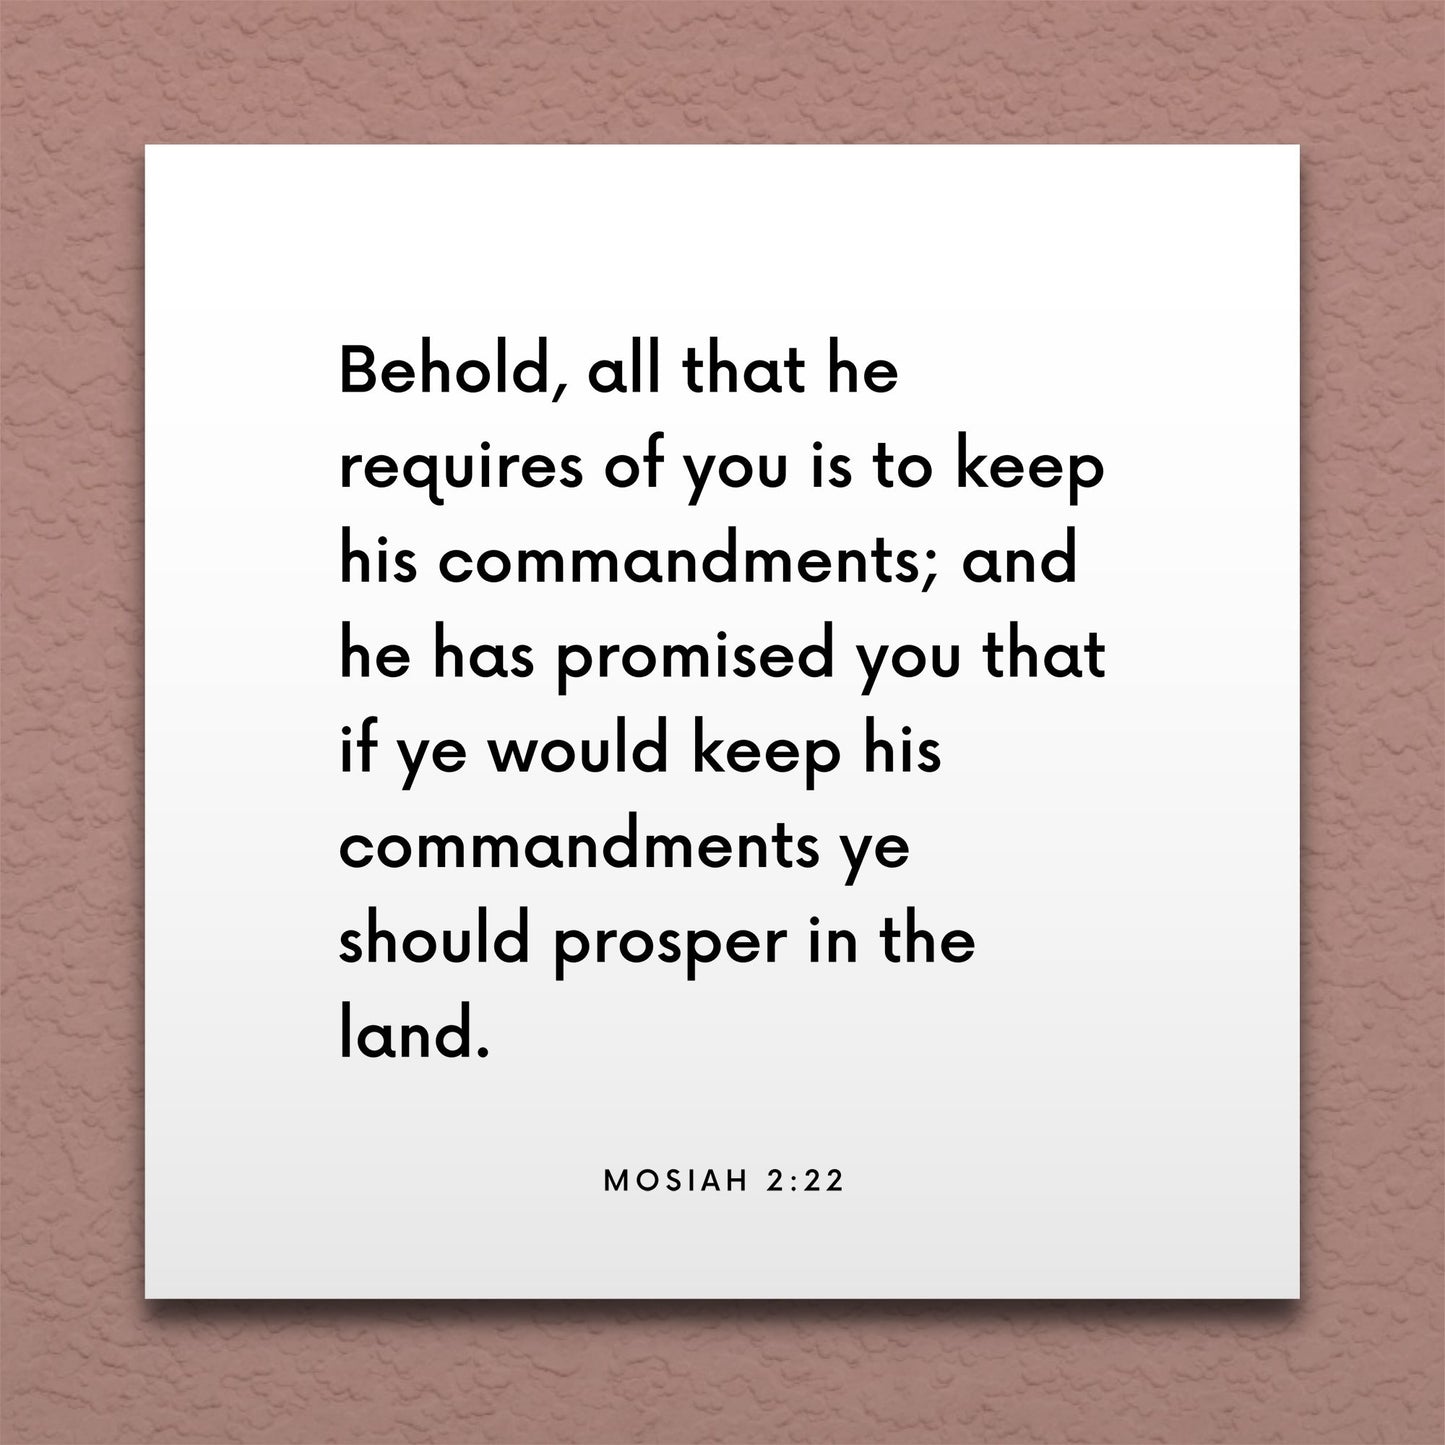 Wall-mounted scripture tile for Mosiah 2:22 - "All that he requires of you is to keep his commandments"